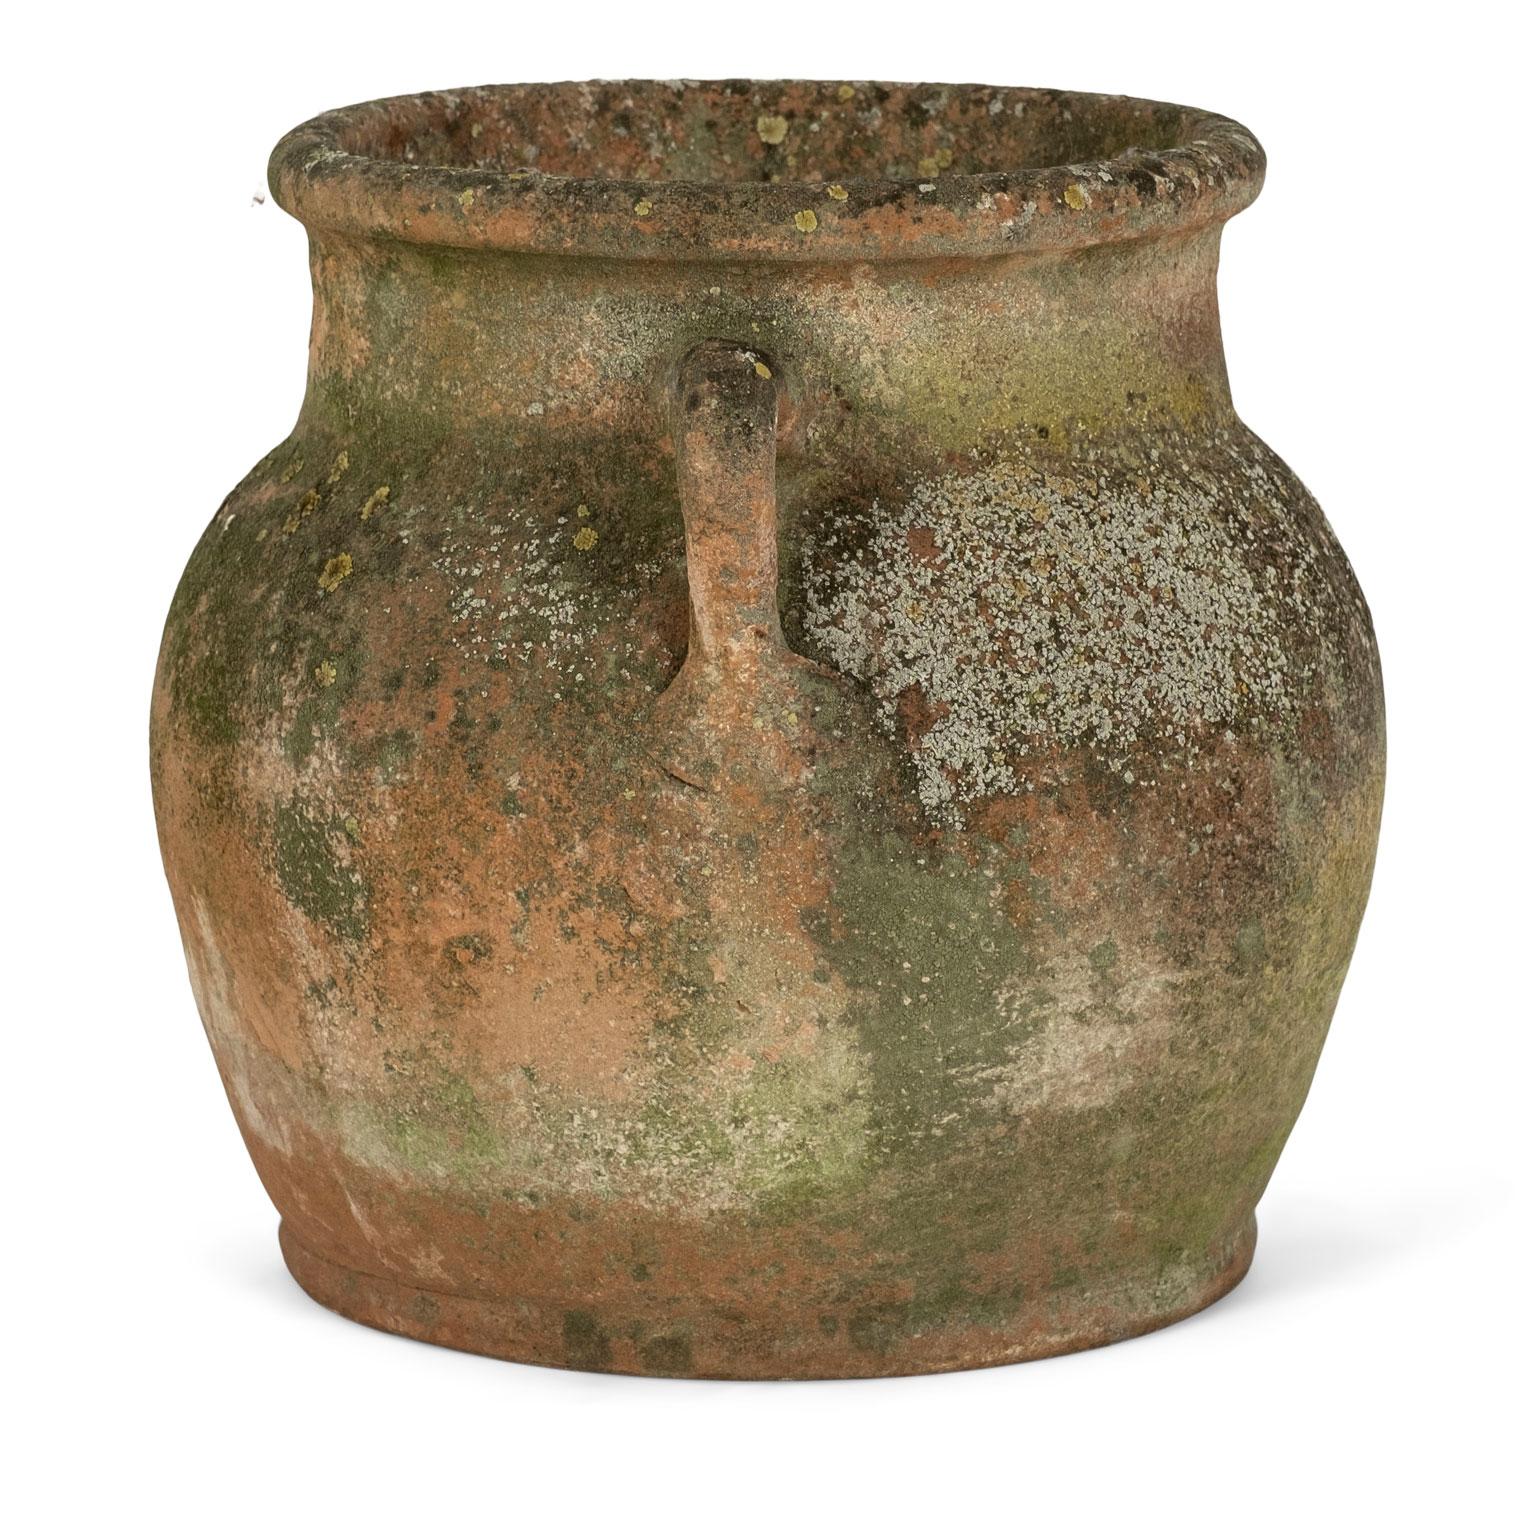 Antique terracotta pot with handles. Five available (see last image). Sold individually and priced $1,200 each.